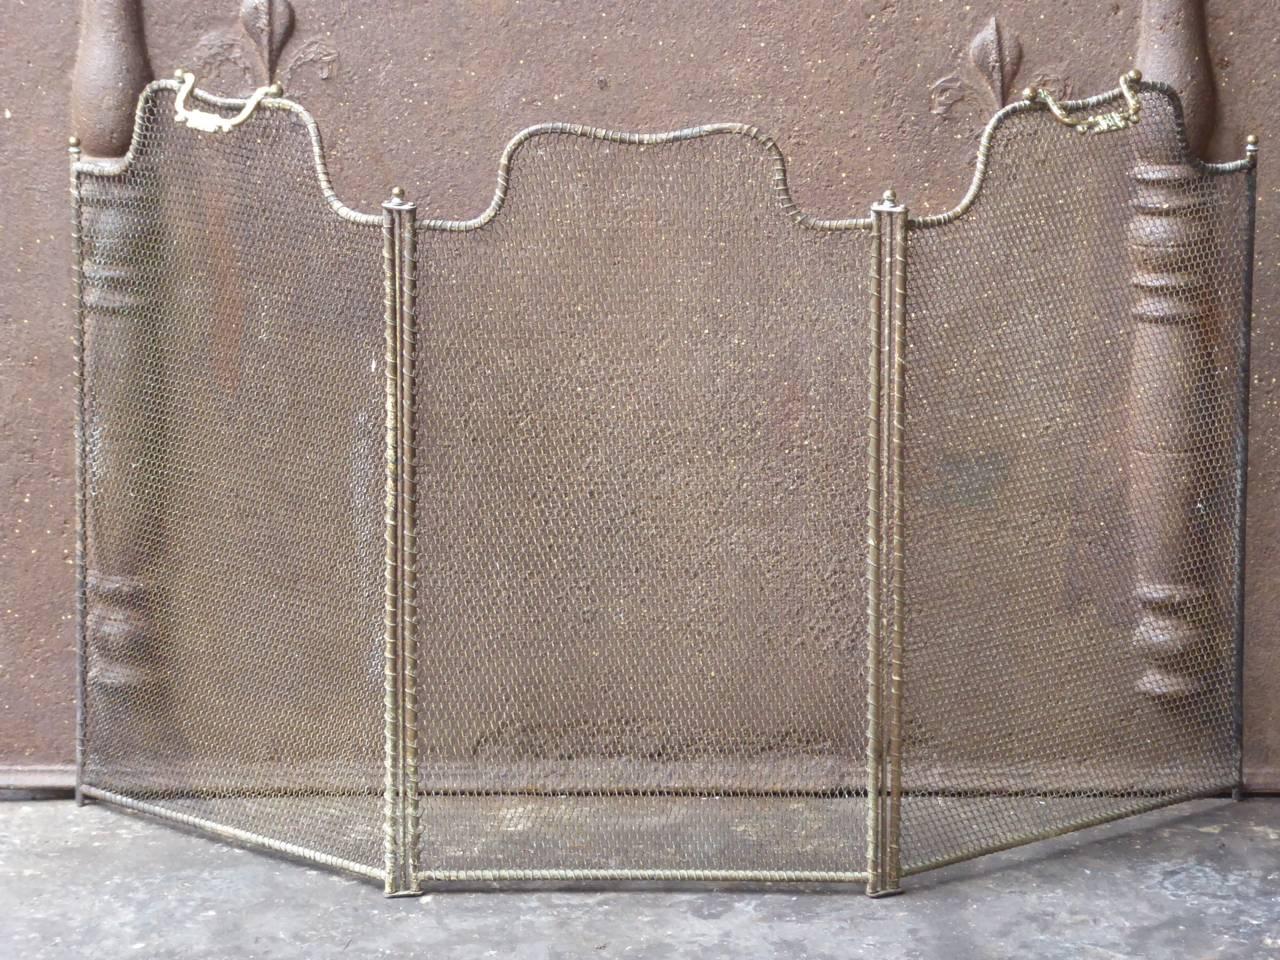 19th century French fireplace screen made of brass and iron.

We have a unique and specialized collection of antique and used fireplace accessories consisting of more than 1000 listings at 1stdibs. Amongst others we always have 300+ firebacks, 250+